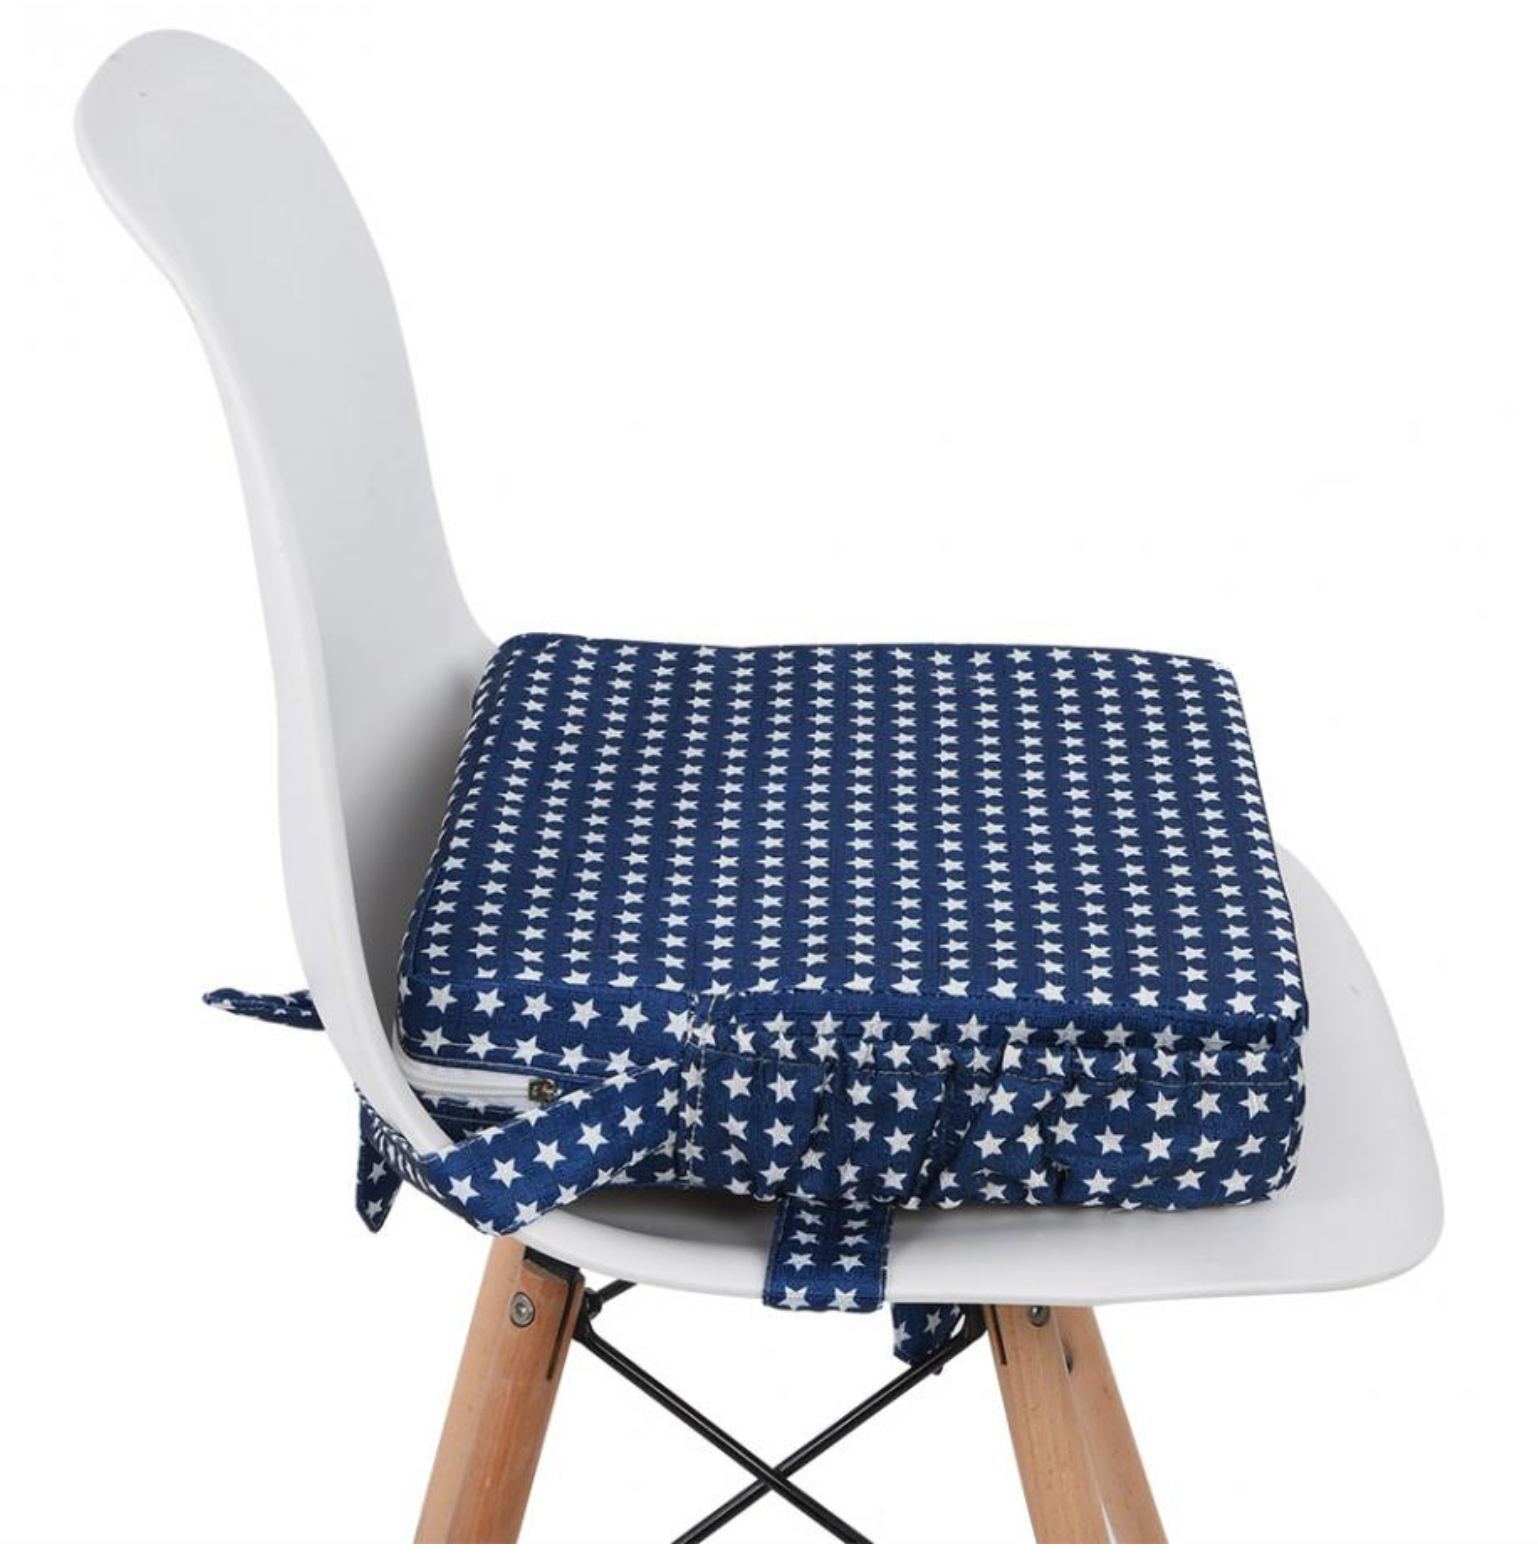 Chair Booster Cushion for dining at the table *Blue Stars*